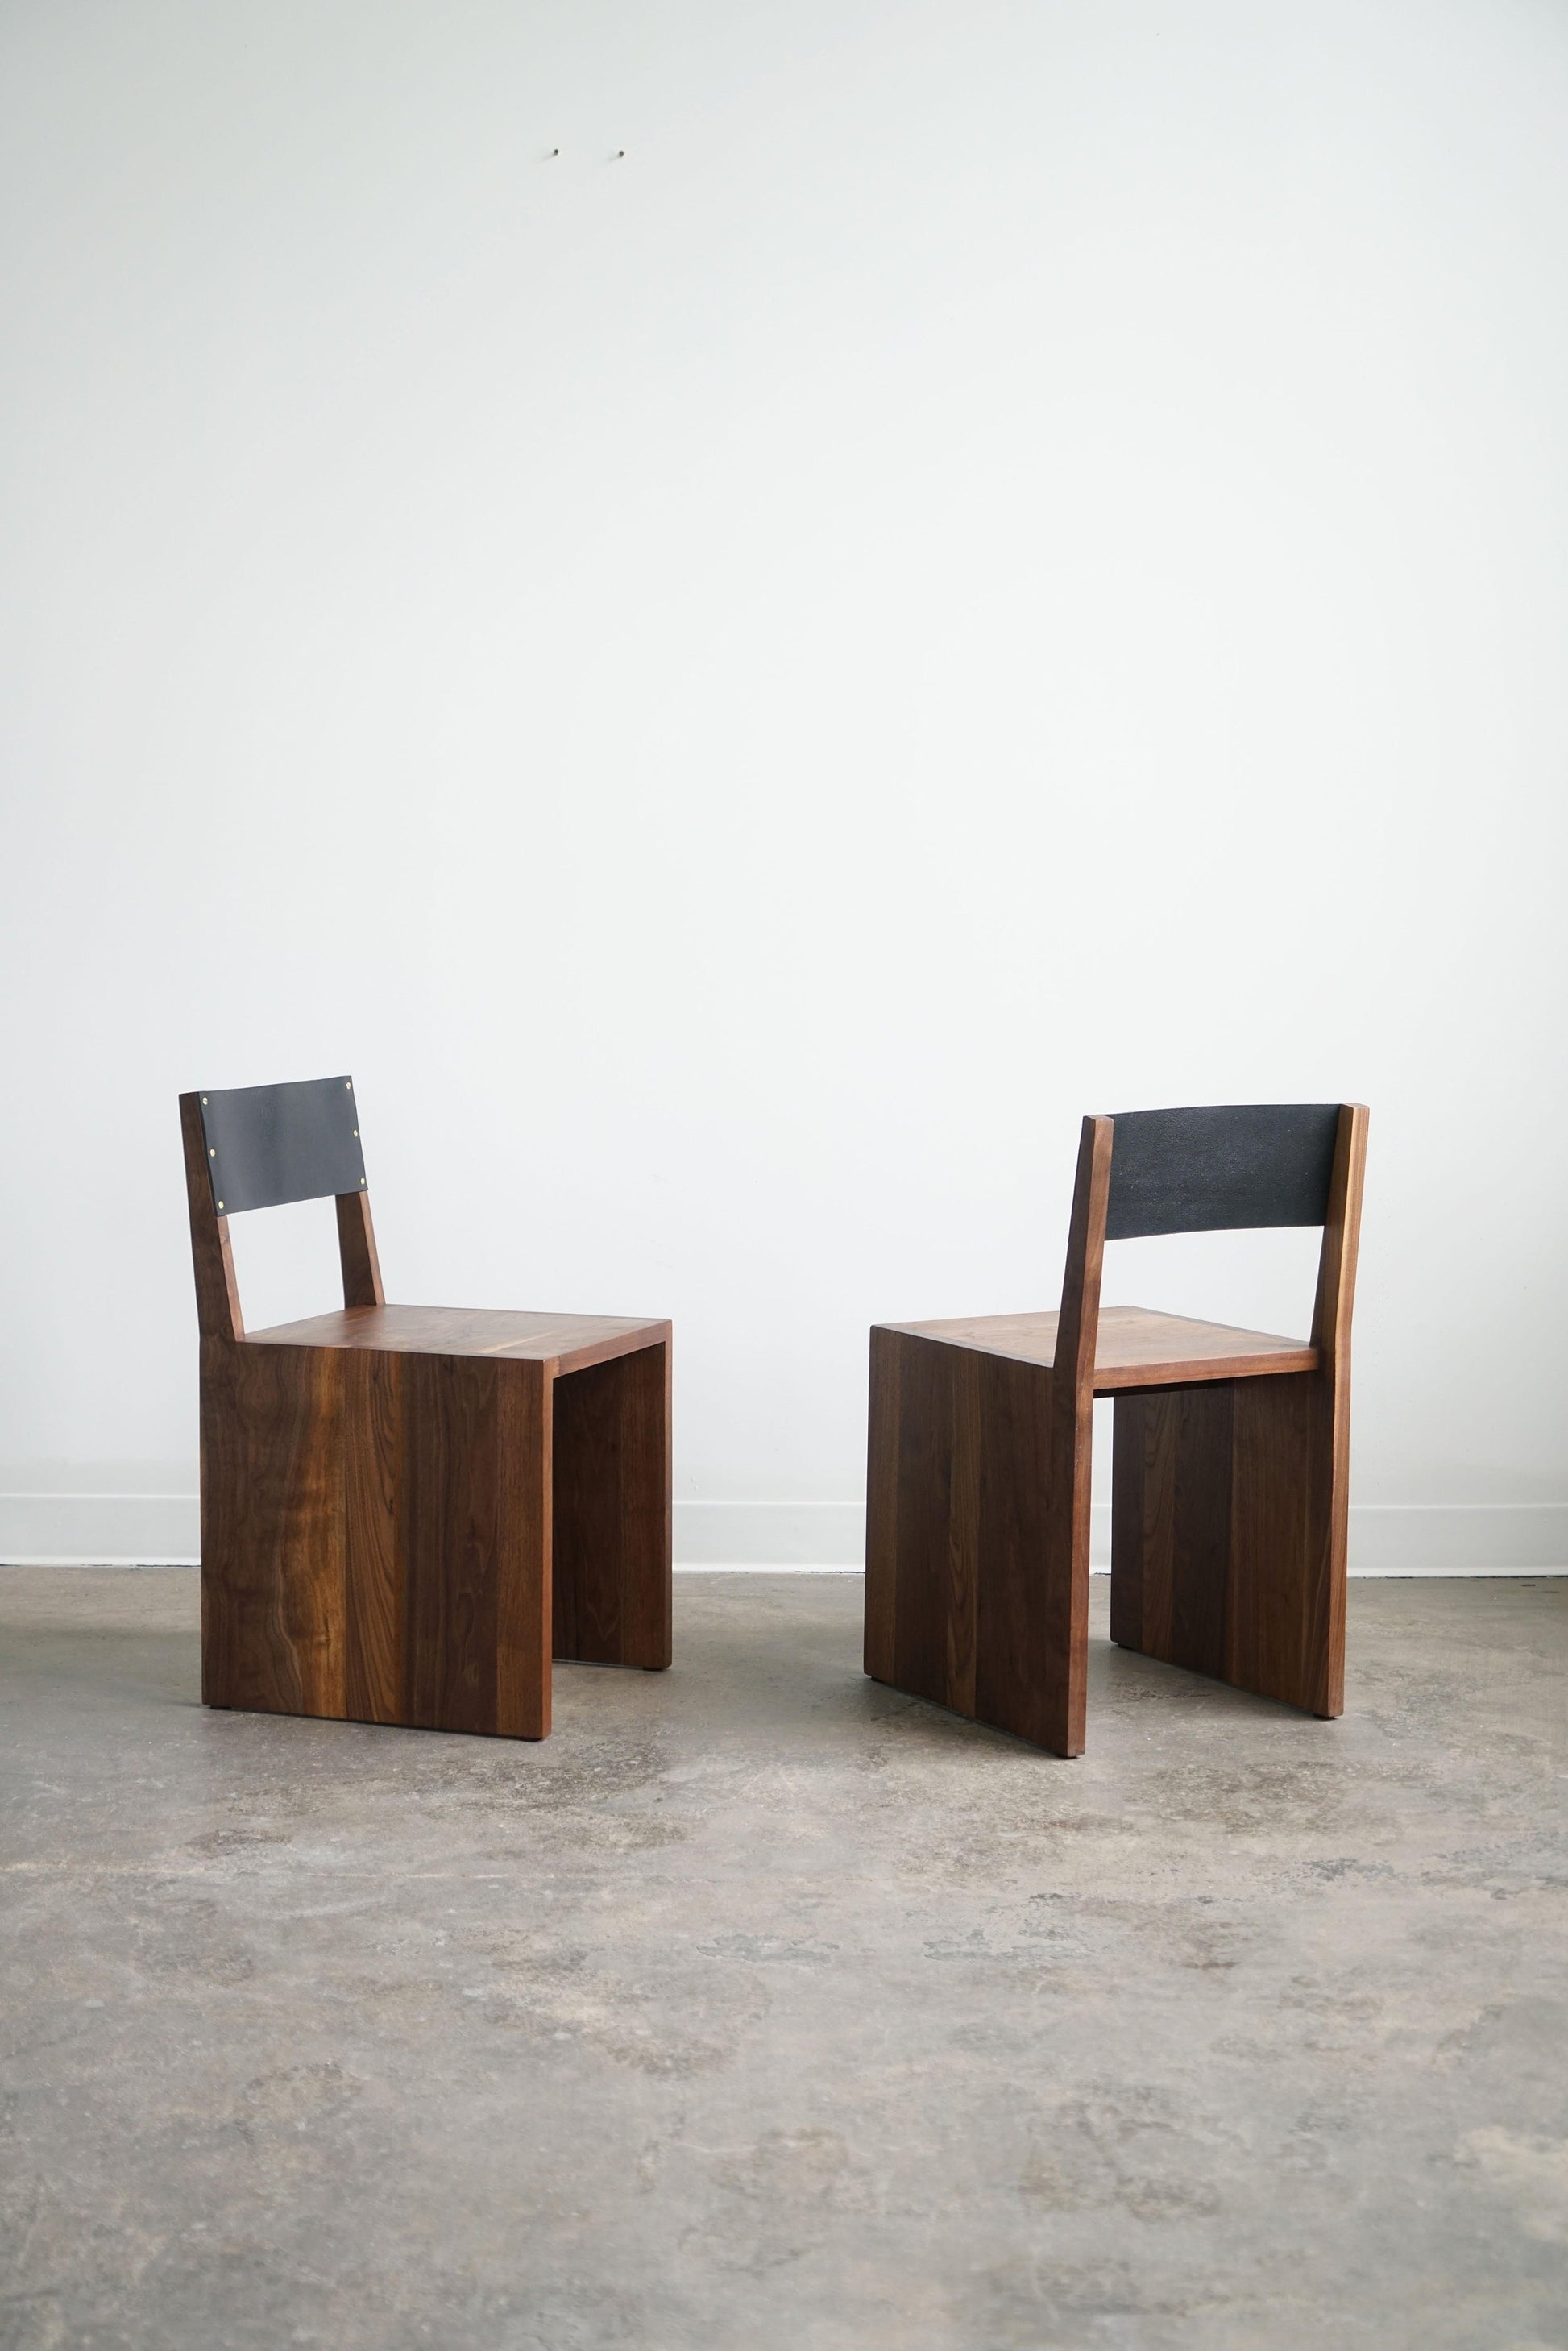 Lake Street Chairs in Walnut by Last Workshop Chairs